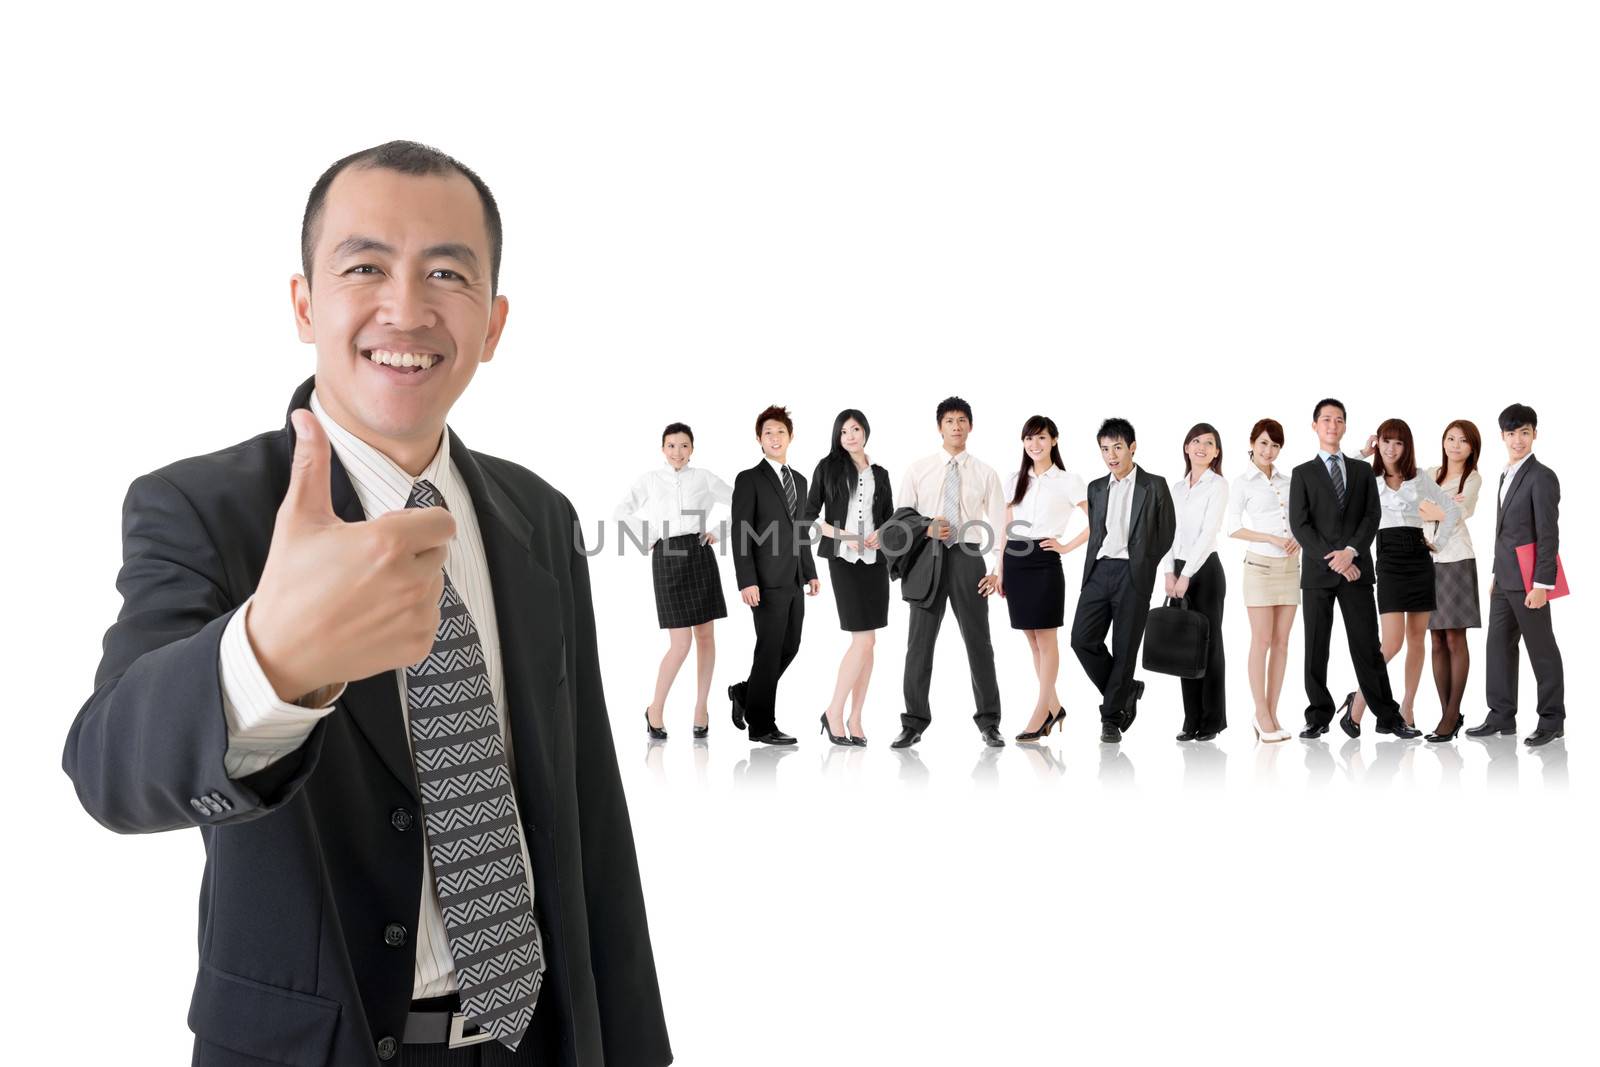 Mature businessman give you a gesture of excellent and standing in front of his team on studio white background.